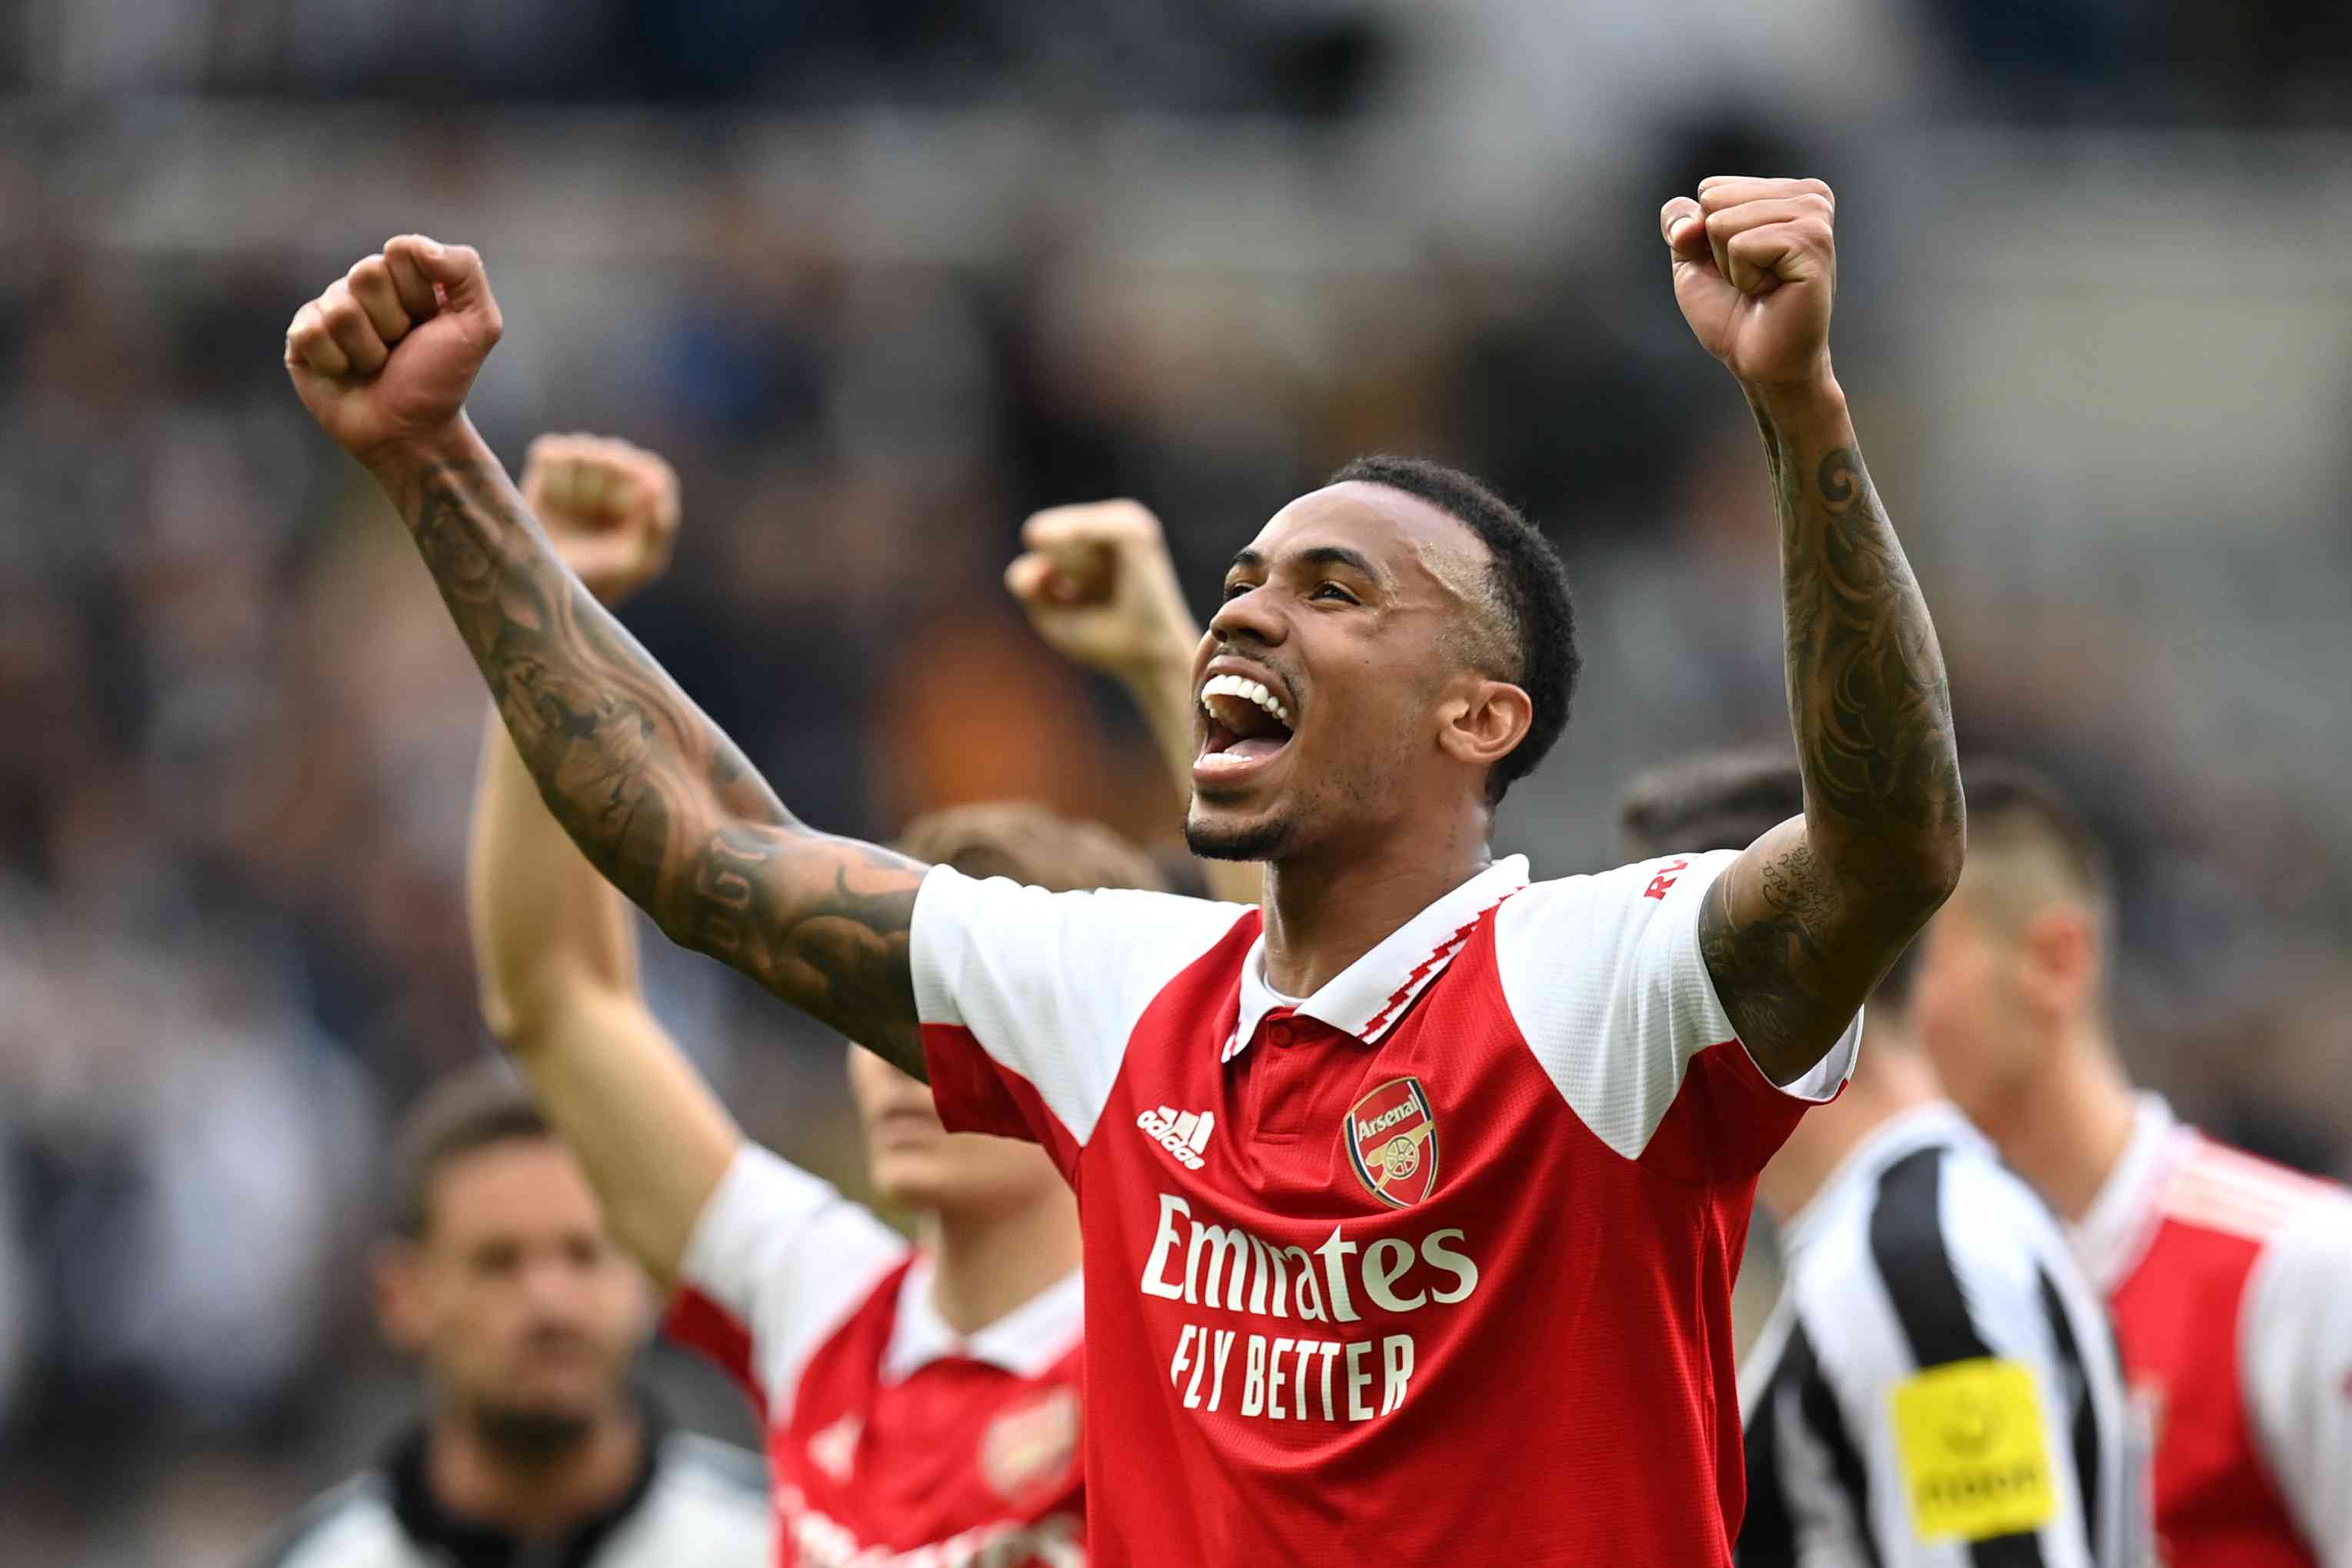 Arsenal keeps pressure on Man City with 2-0 win at Newcastle